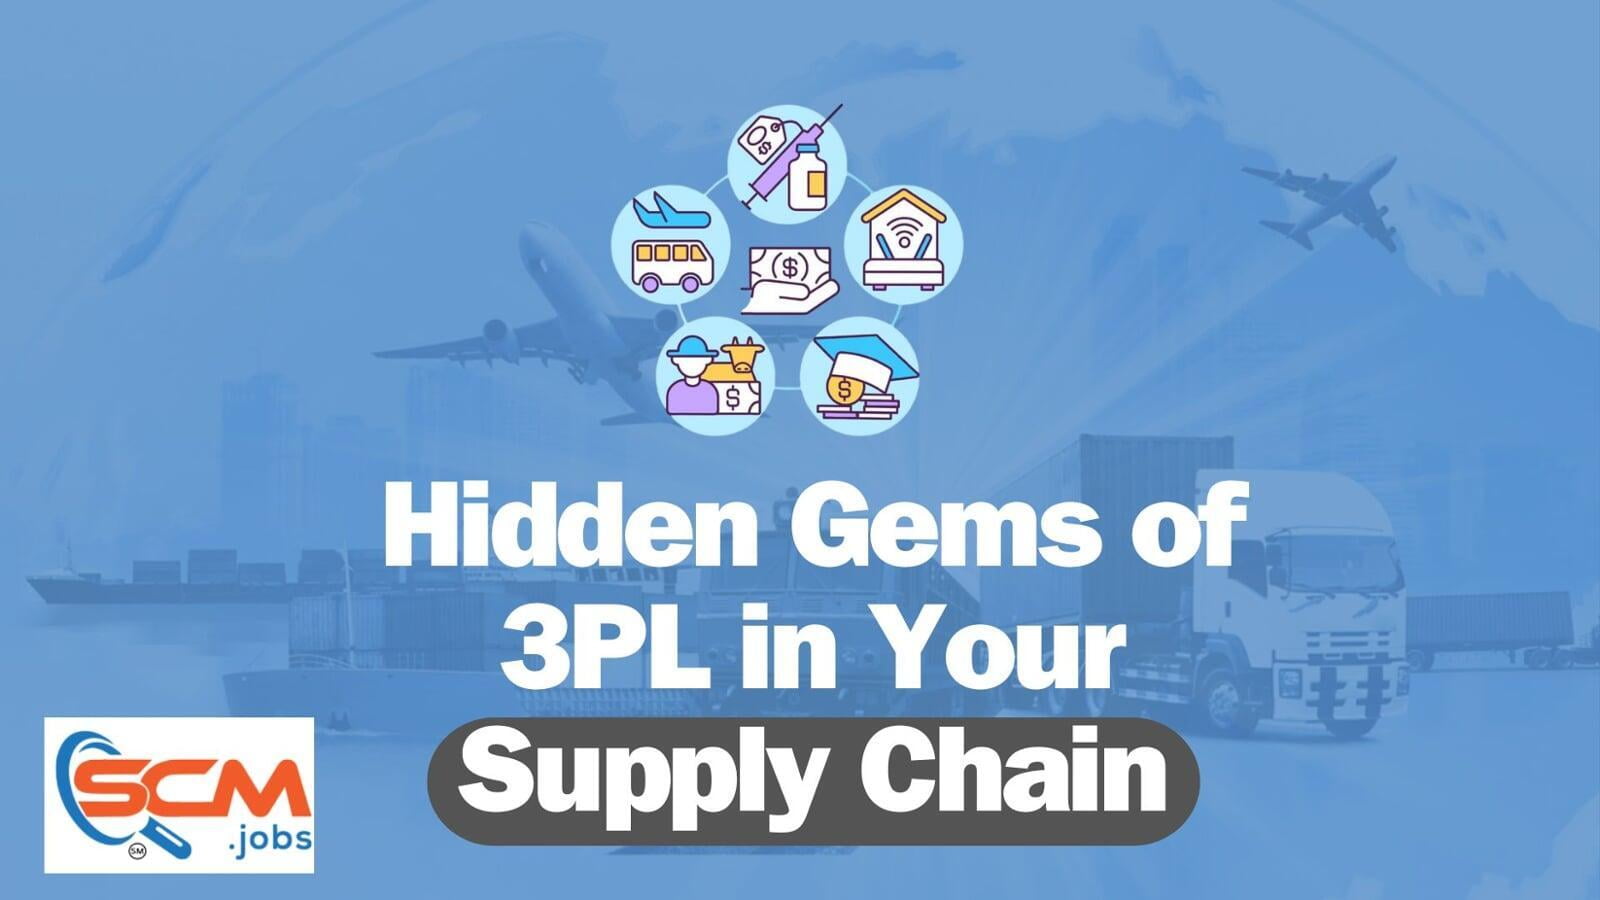 How to Harness the Hidden Gems of 3PL in Your Supply Chain